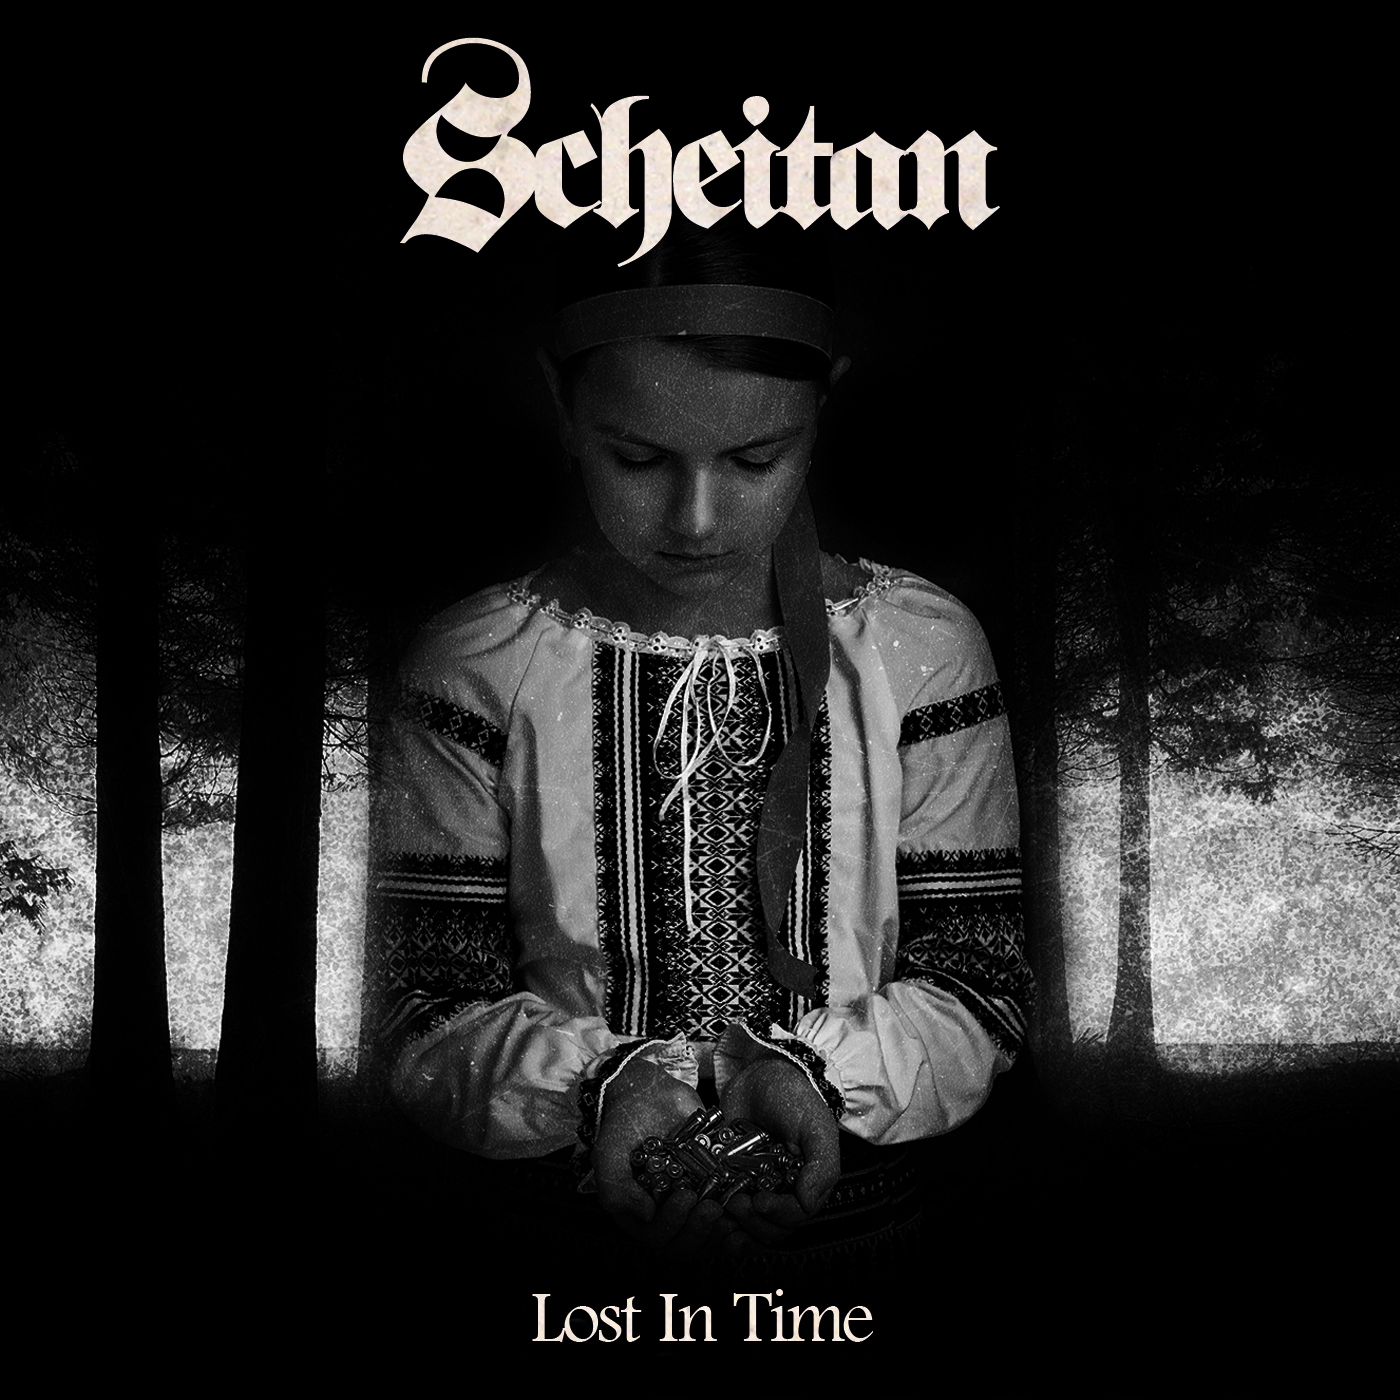 Scheitan – “Lost In Time” – New song available now!